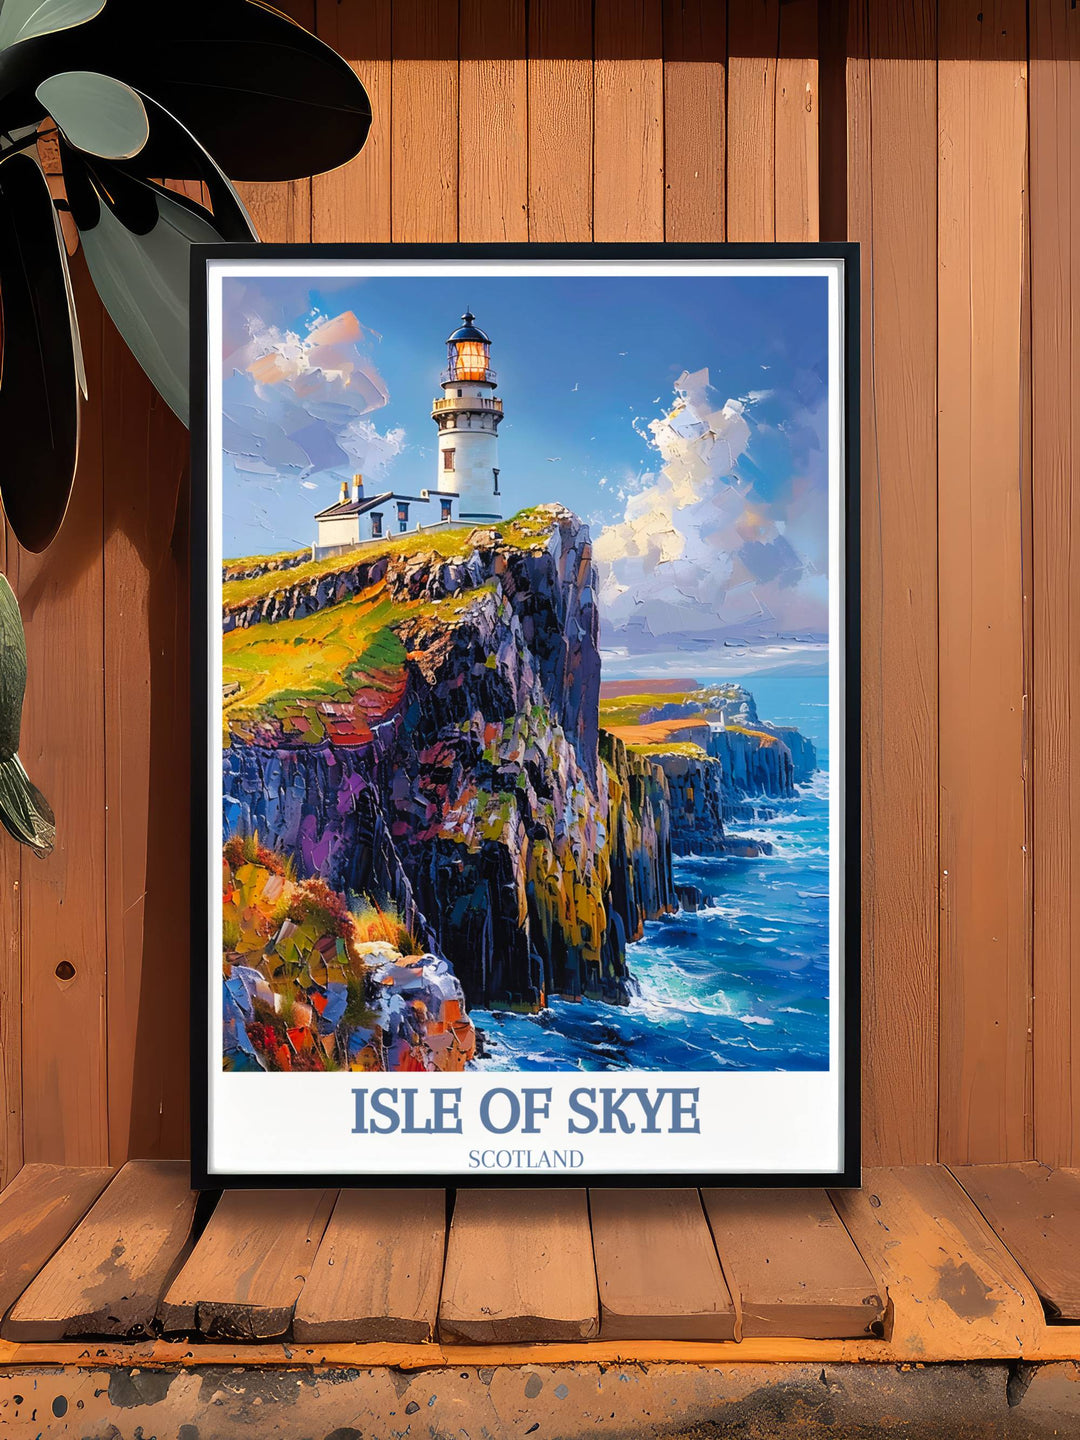 An evocative photograph of Neist Point Lighthouse with crashing waves, ideal for adding a dynamic marine element to your wall decor.